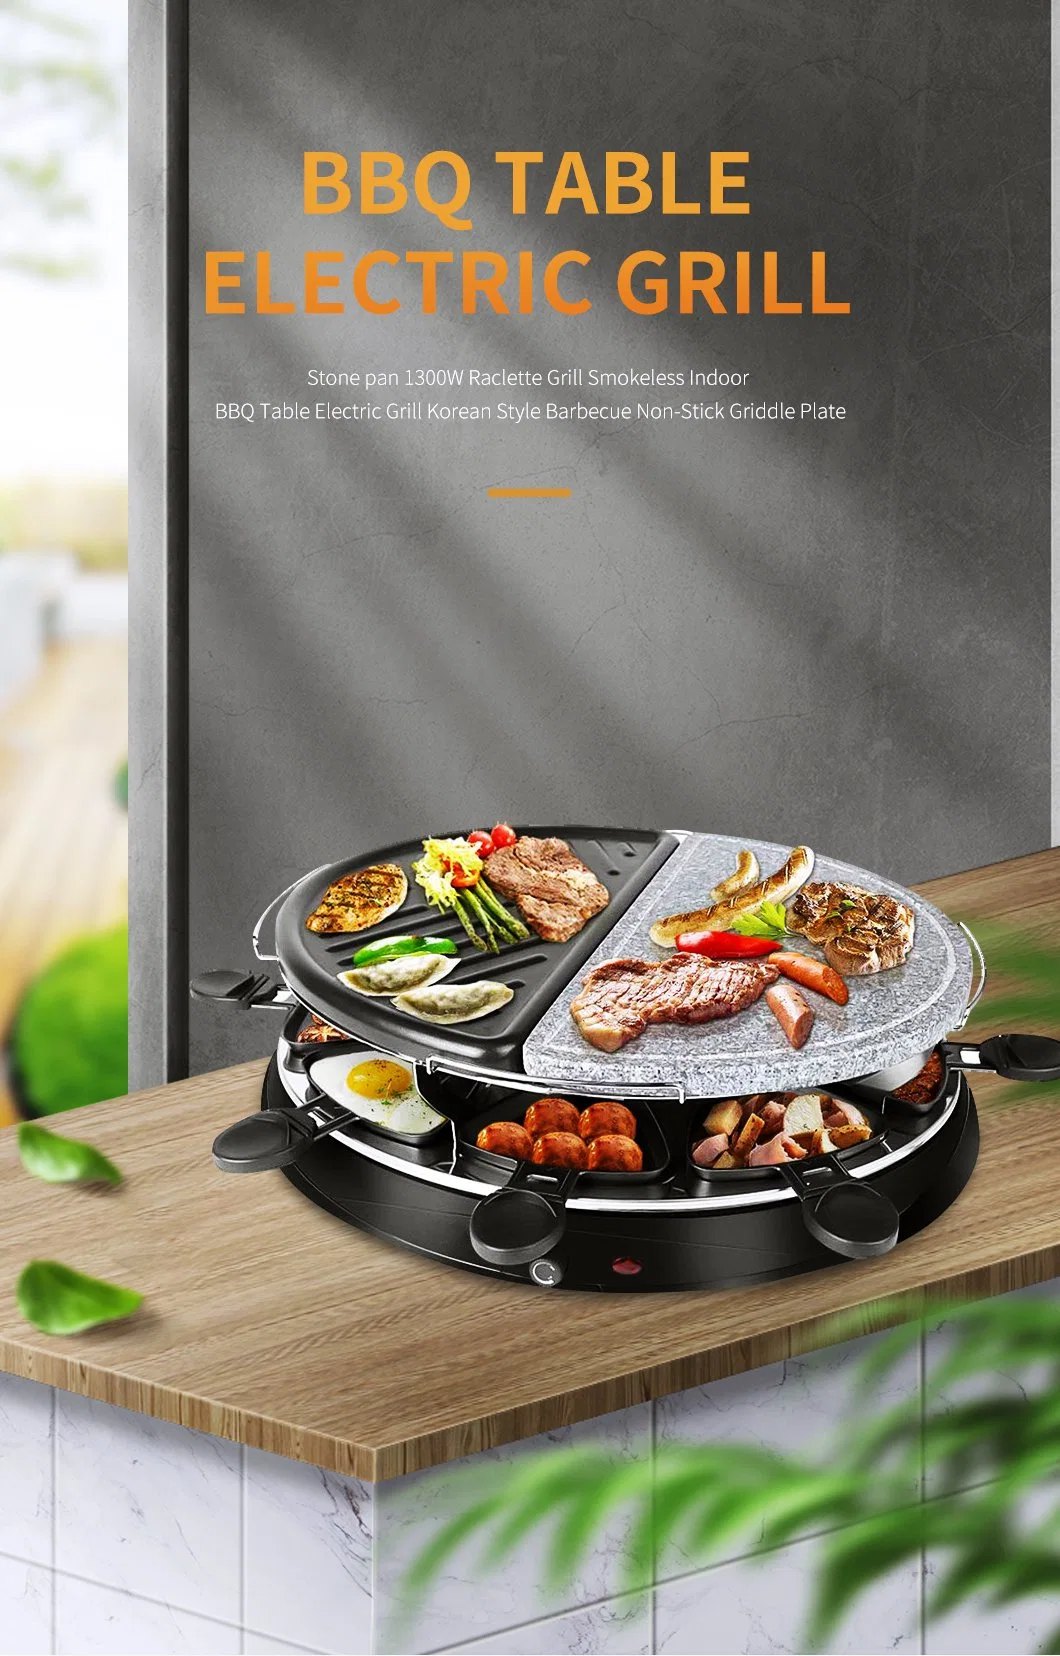 Stone Pan 1300W Raclette Grill Smokeless Indoor BBQ Non Stick Plate